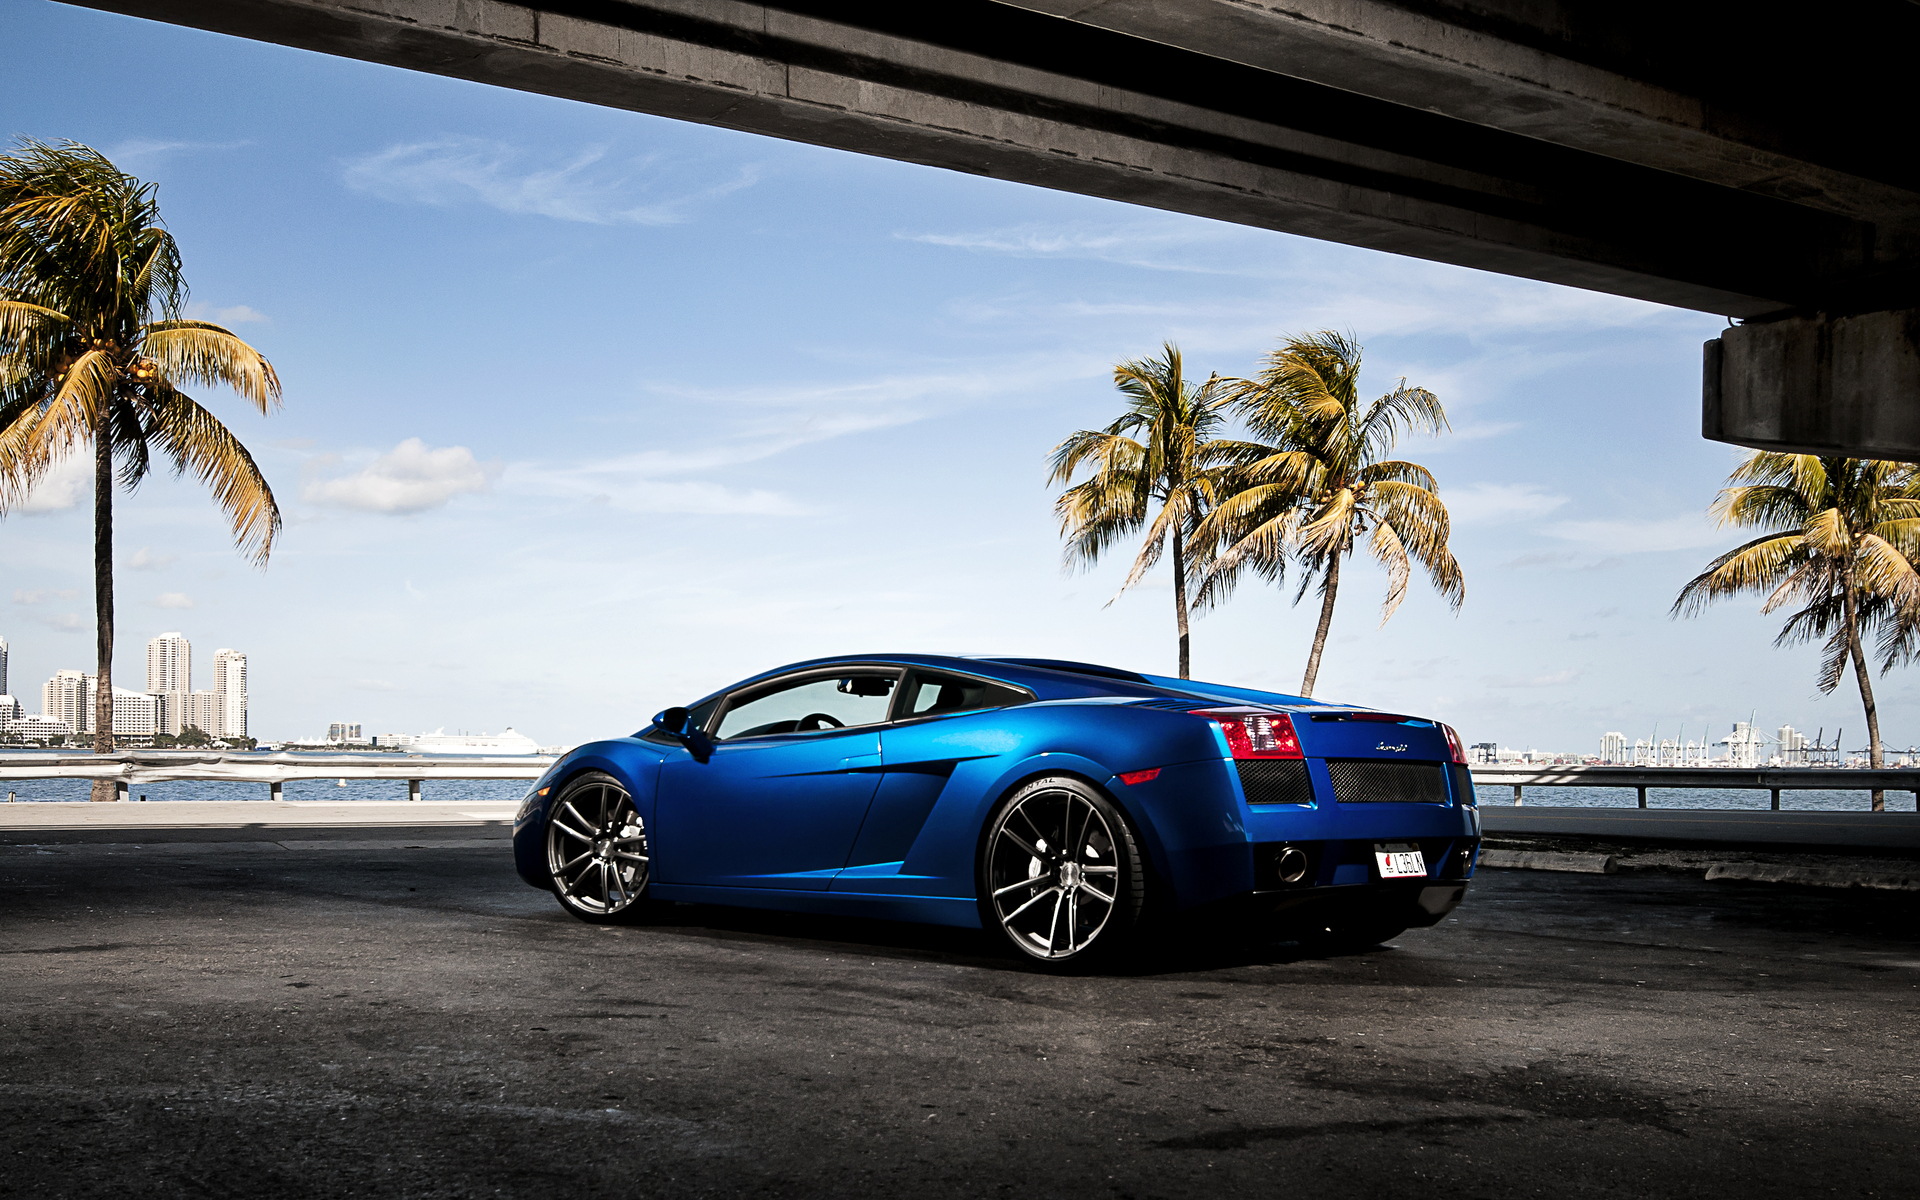 Lamborghini Background free download | Wallpapers, Backgrounds ...